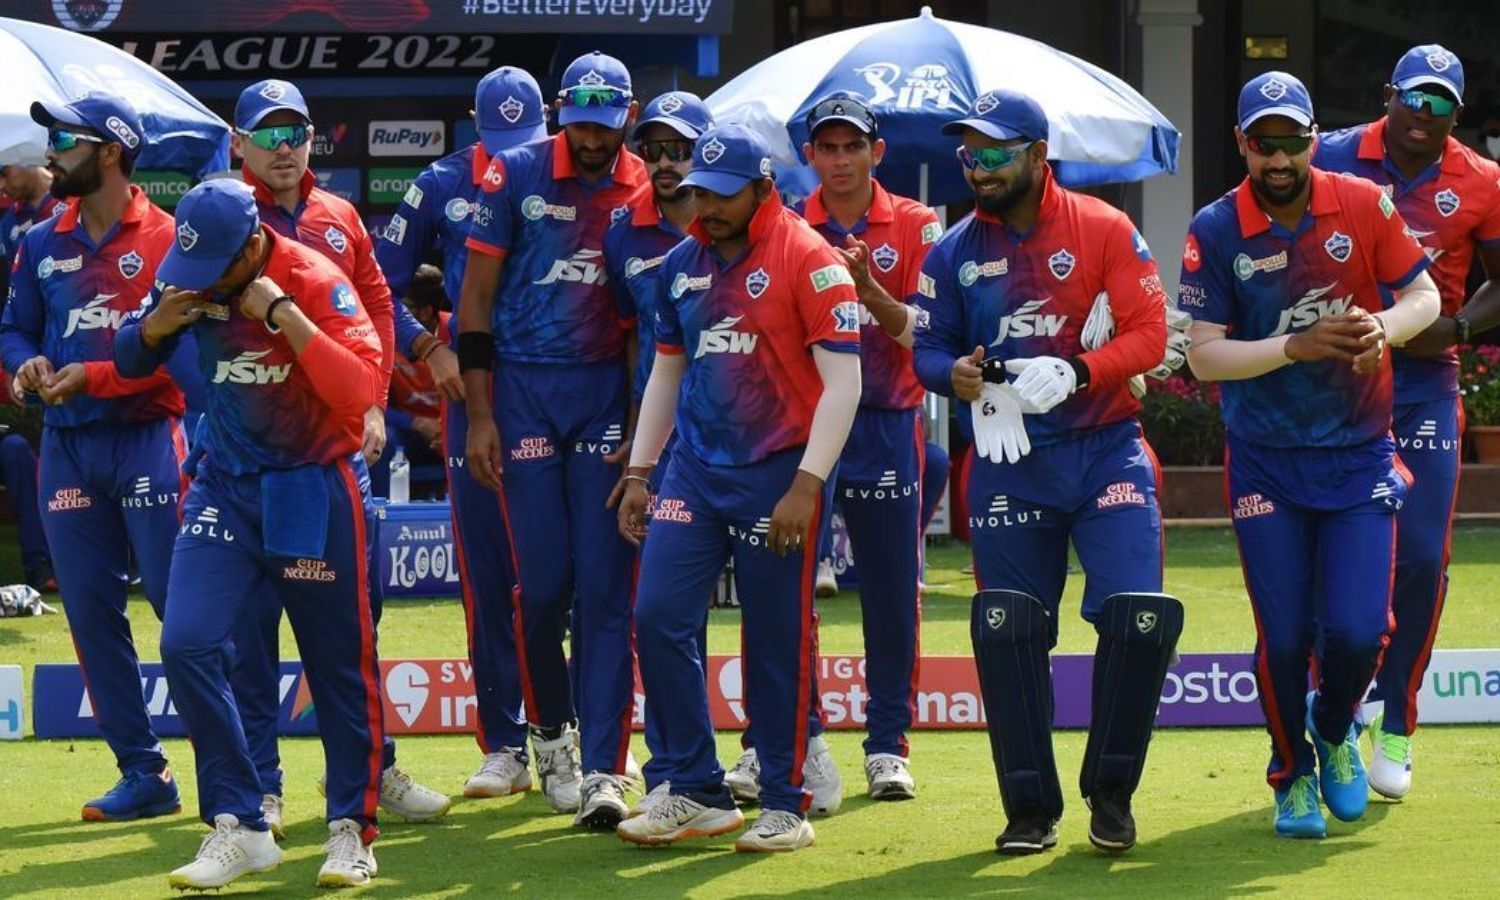 Delhi Capitals would want their batters to hit the ground running